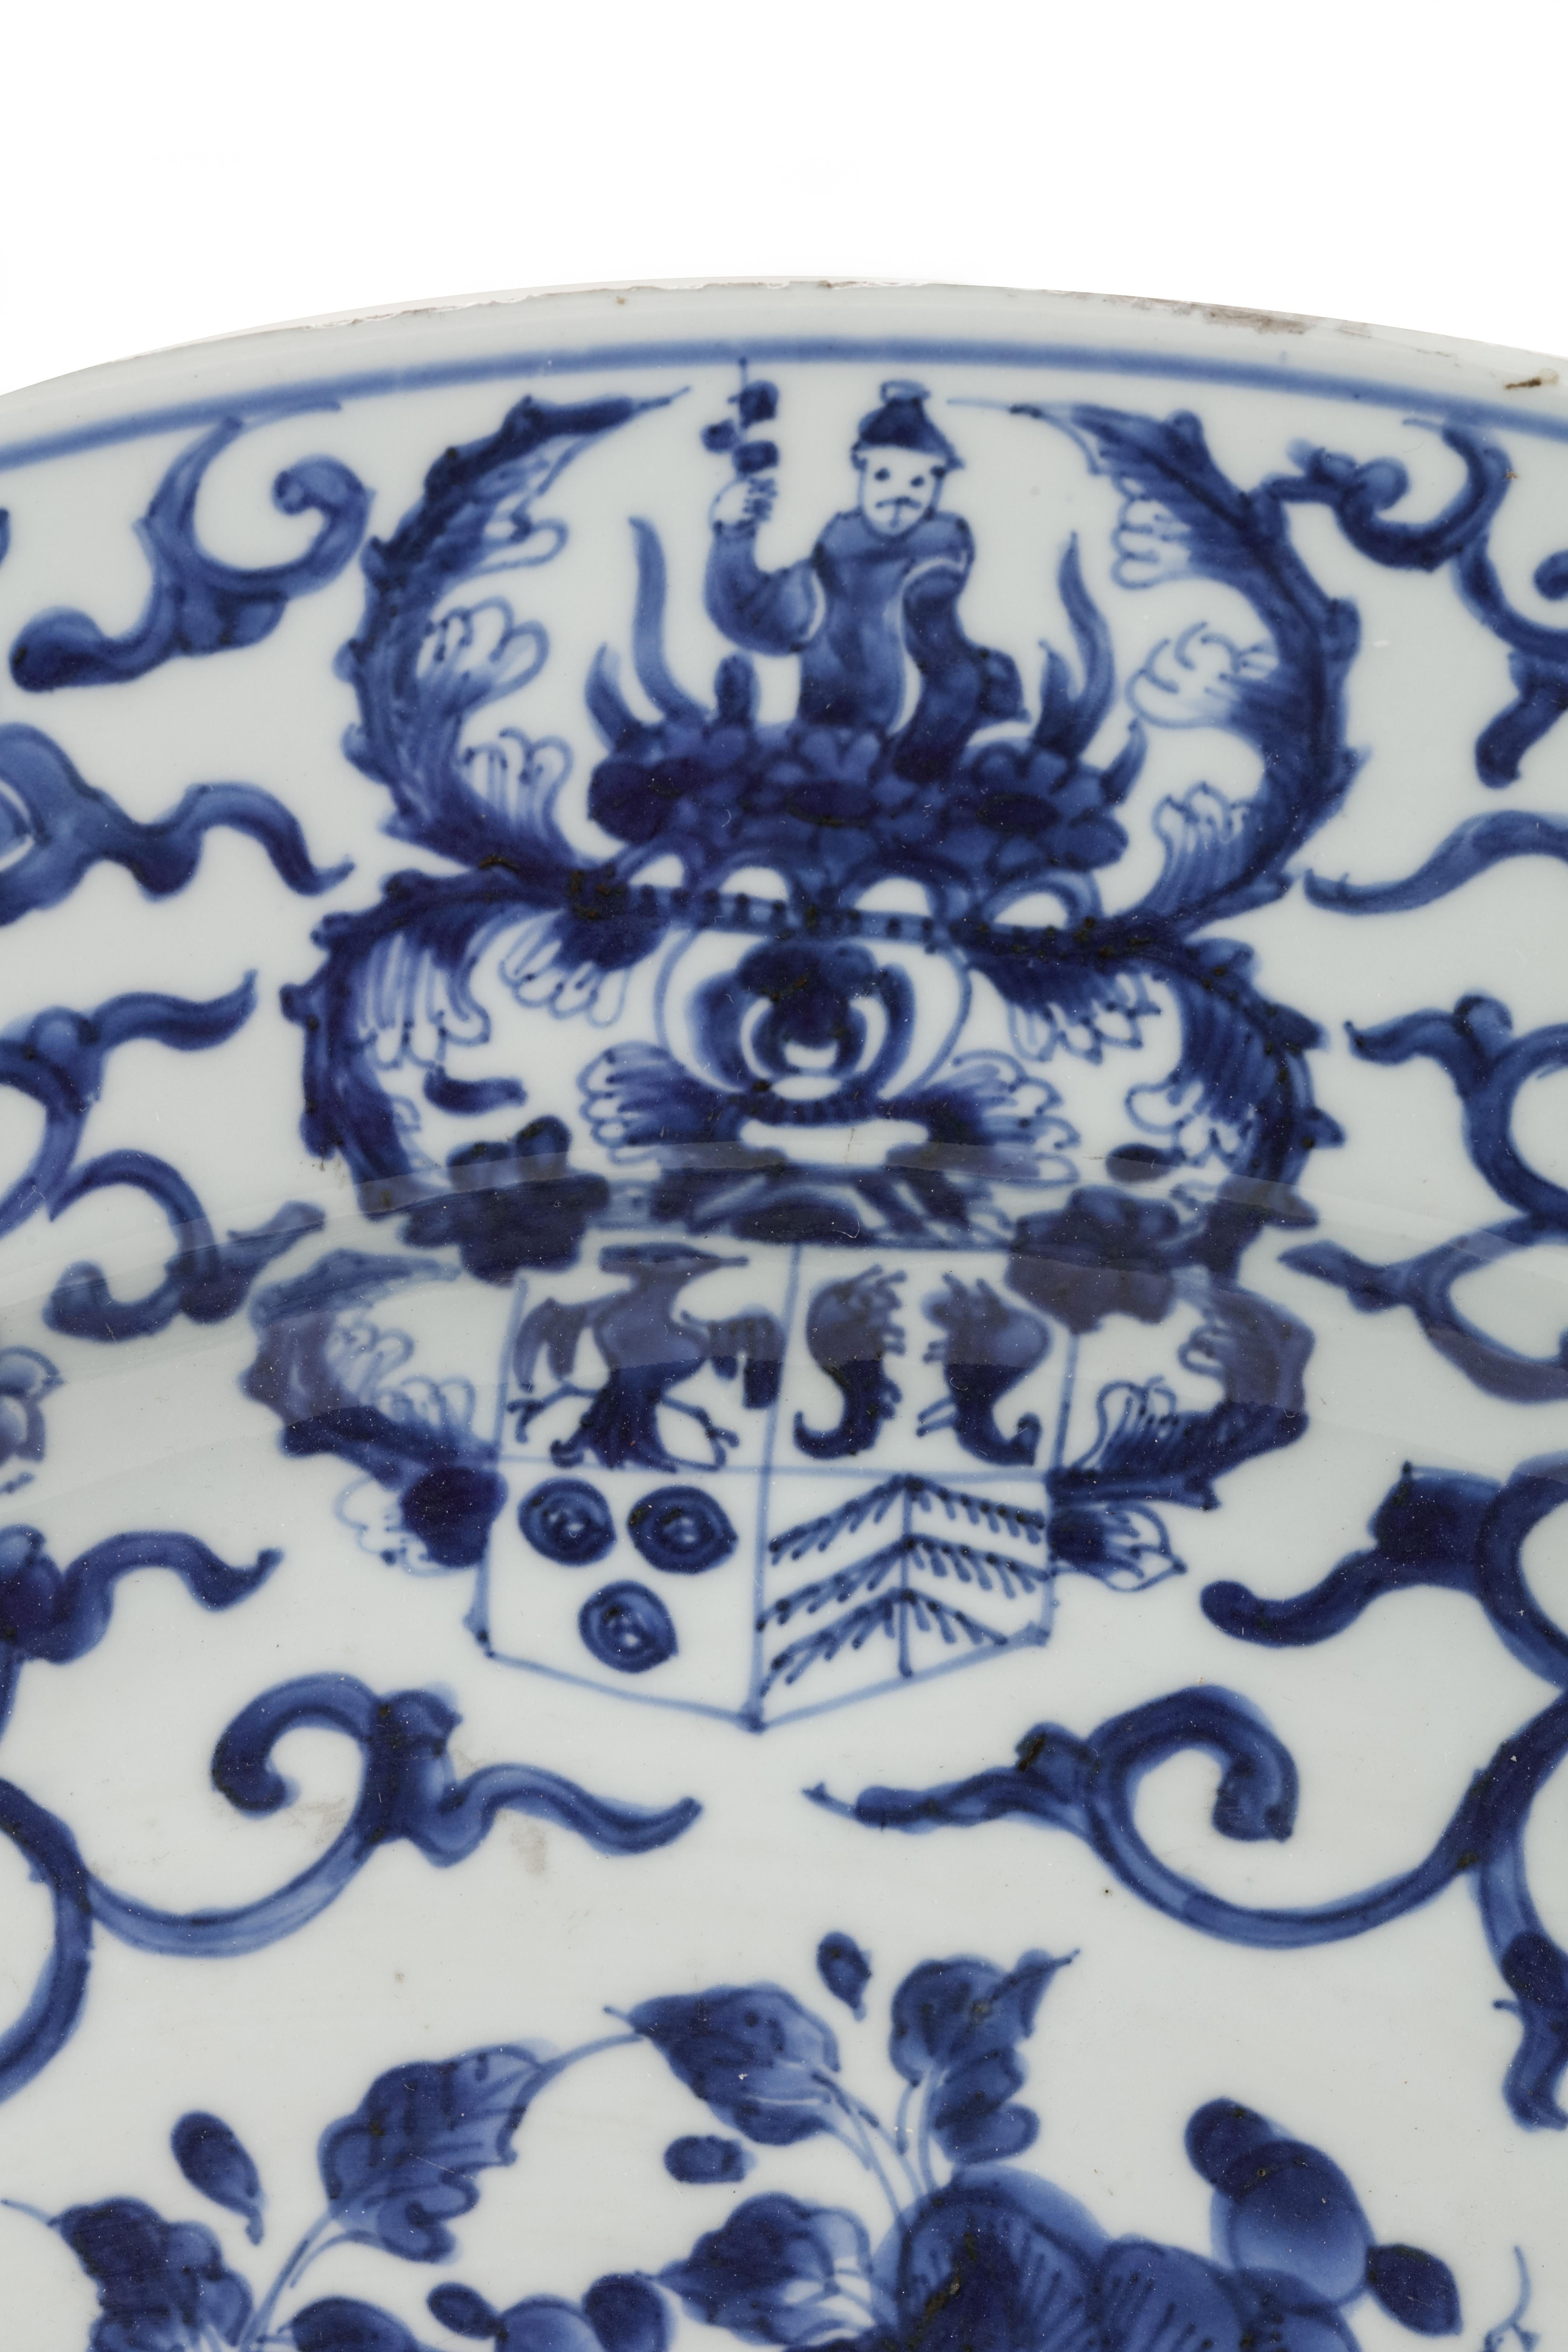 A pair of very large Chinese armorial export blue and white porcelain 'Pelgrom' chargers

Kangxi period, circa 1710

The two chargers, decorated in the centre in typical Chinese style, one with a bird on a rock, the other with a flying insect,